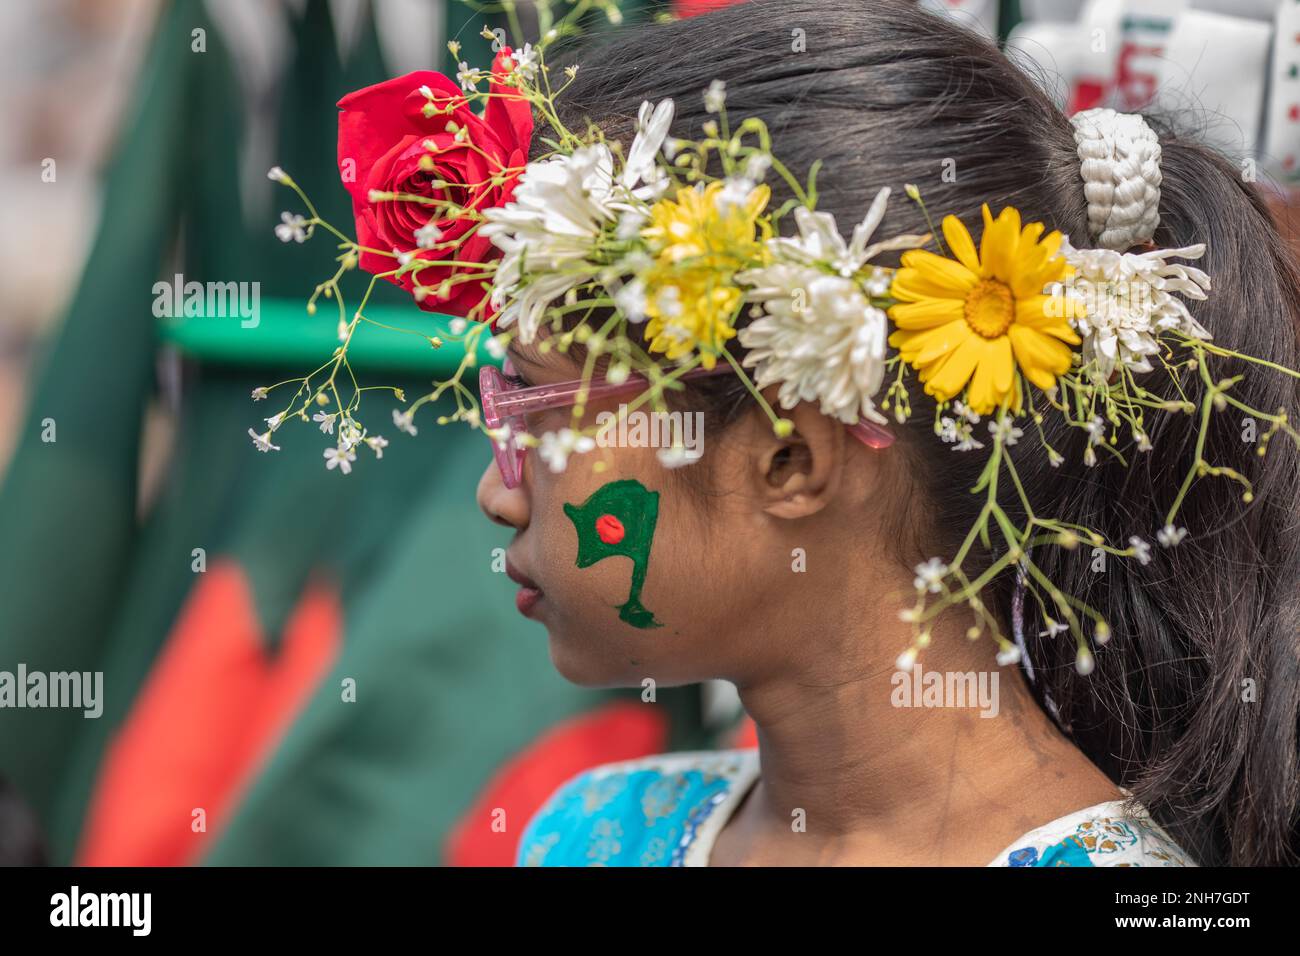 A kid seen with paint on her face and flowers on the head at the Martyr's Monument, or Shaheed Minar during the International Mother Language Day in Dhaka. Bangladeshis pay tribute at the Martyr's Monument, or Shaheed Minar, on International Mother Language Day in Dhaka, International Mother Language Day is observed in commemoration of the movement where a number of students died in 1952, defending the recognition of Bangla as a state language of the former East Pakistan, now Bangladesh. (Photo by Sazzad Hossain/SOPA Images/Sipa USA) Stock Photo